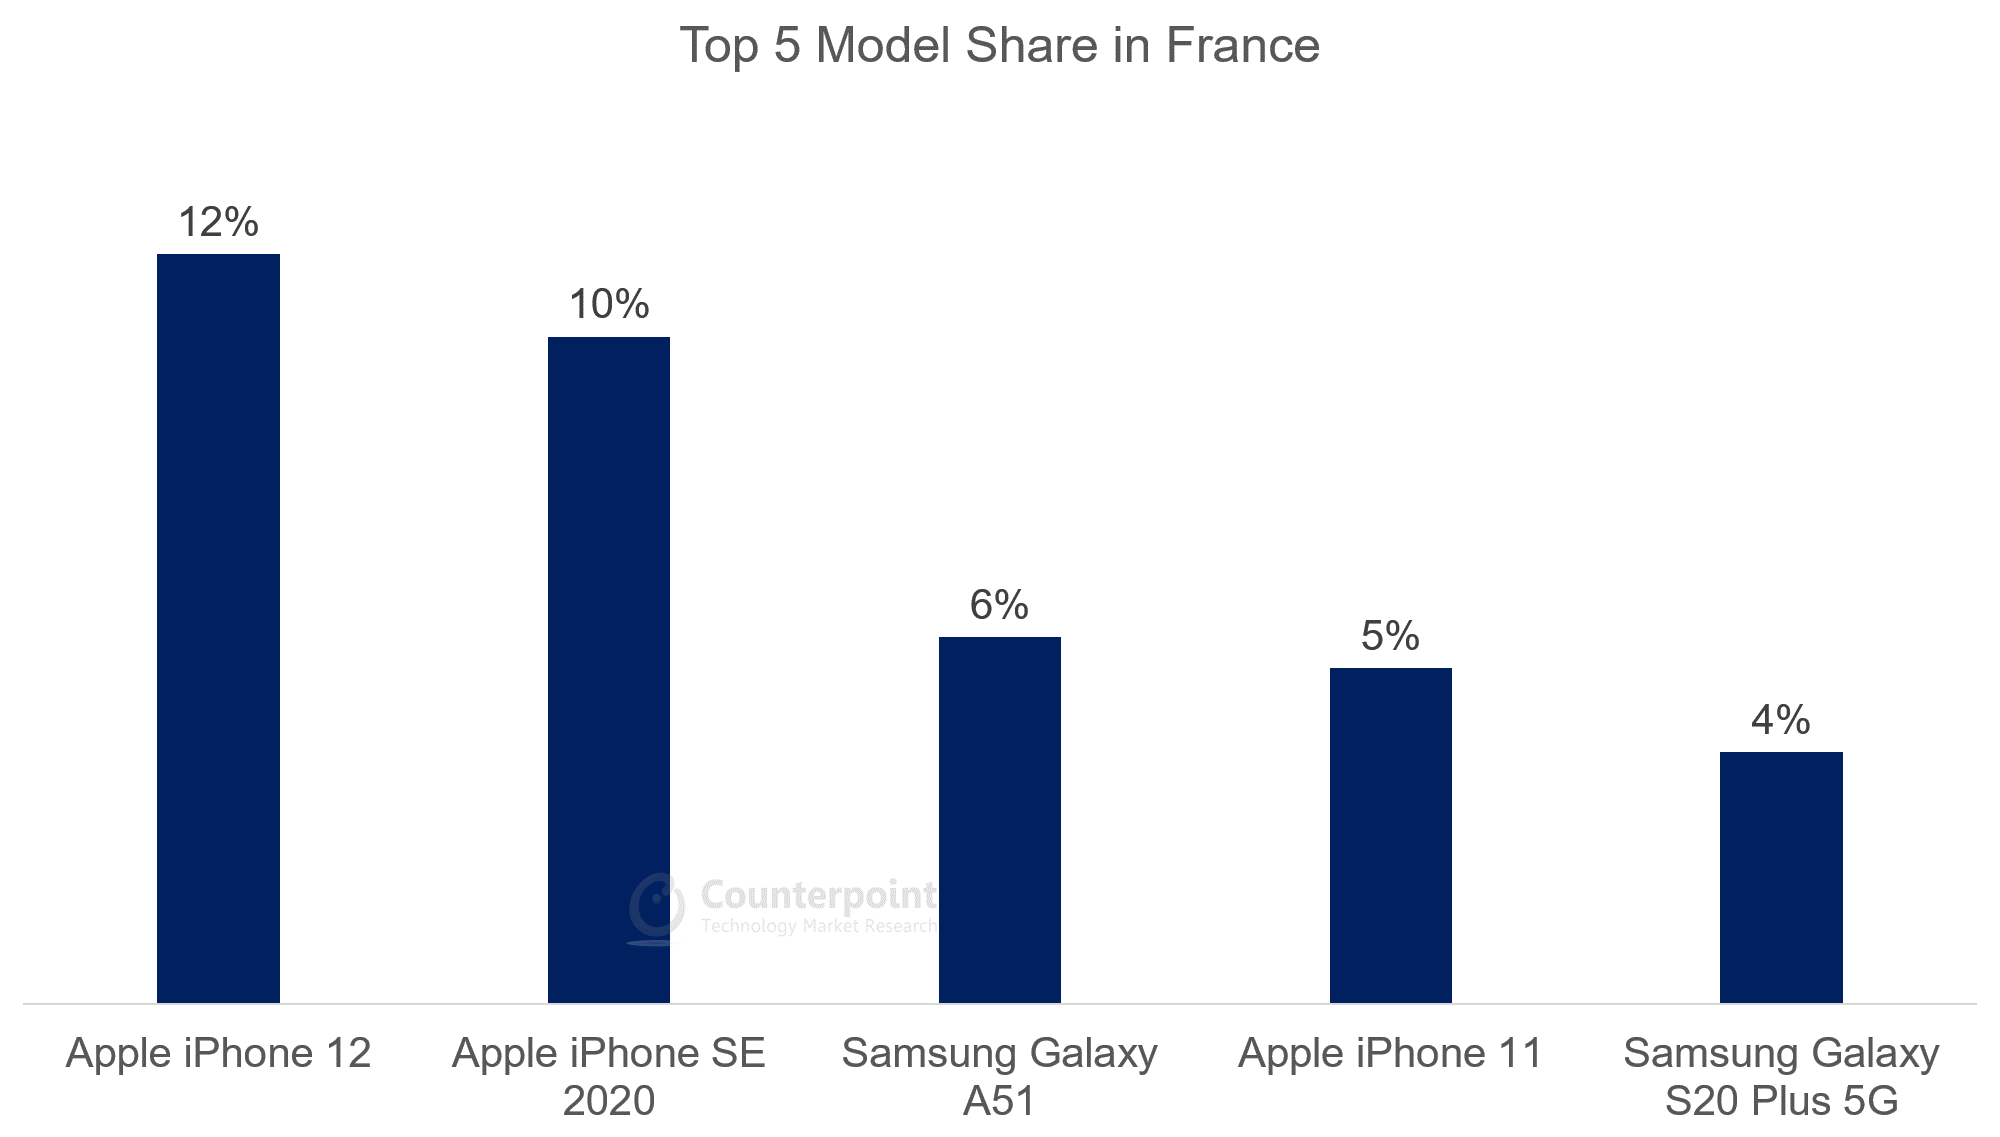 Top 5 Model Share in France - Oct 2020